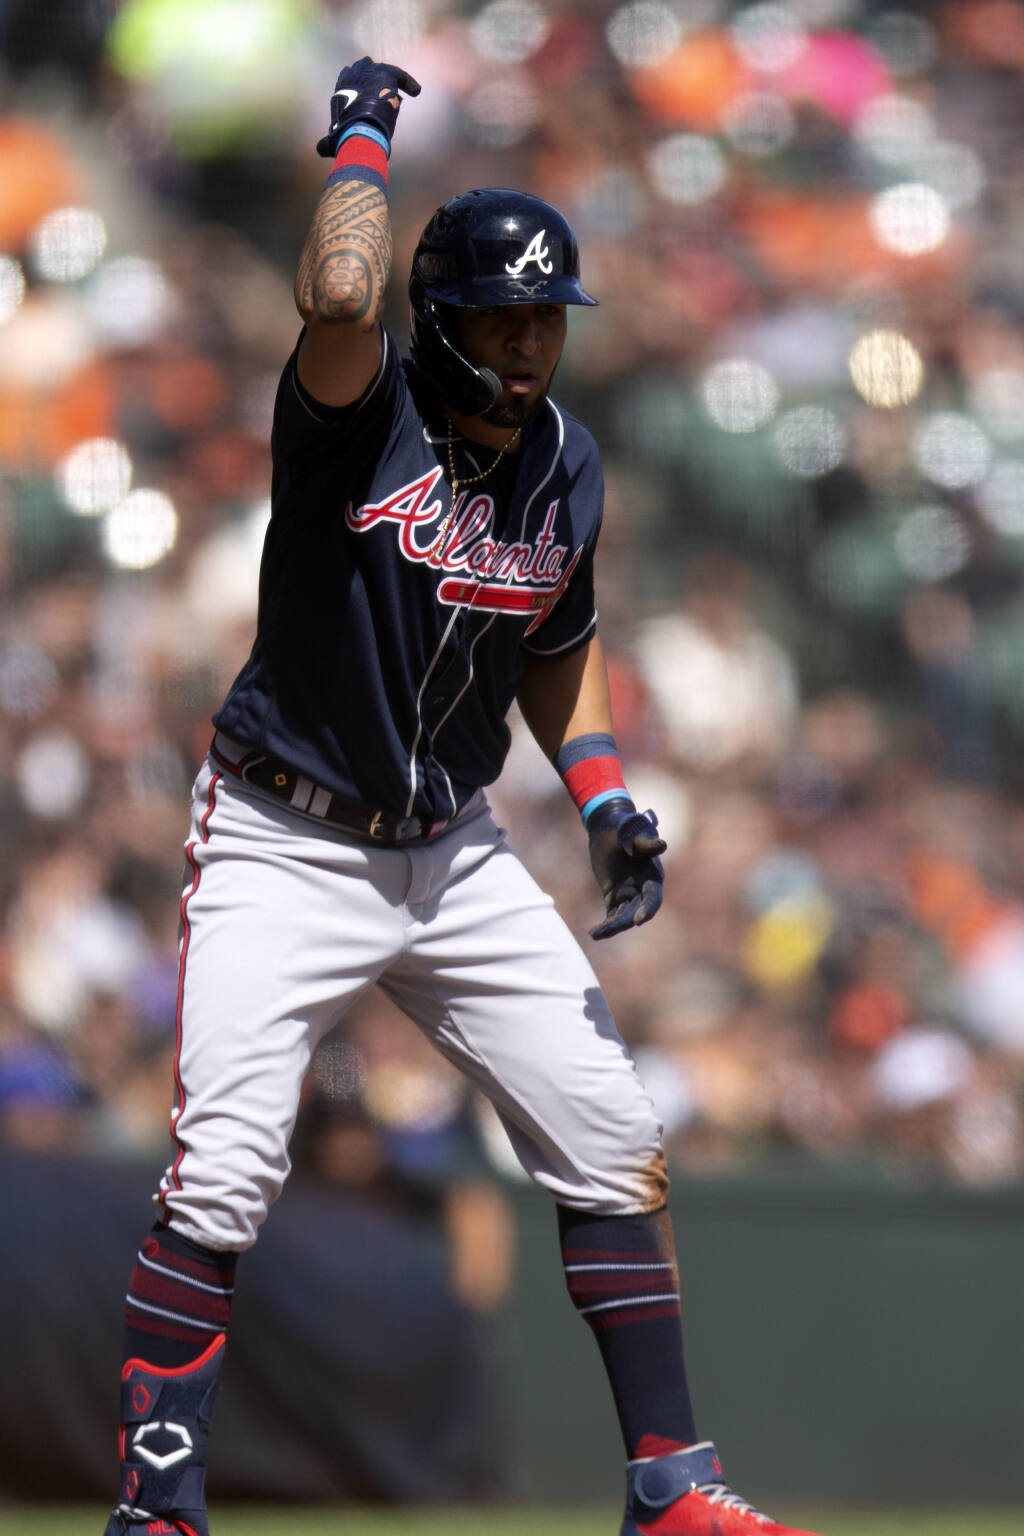 Giants' bats awaken but Eddie Rosario gives Braves four hits in win